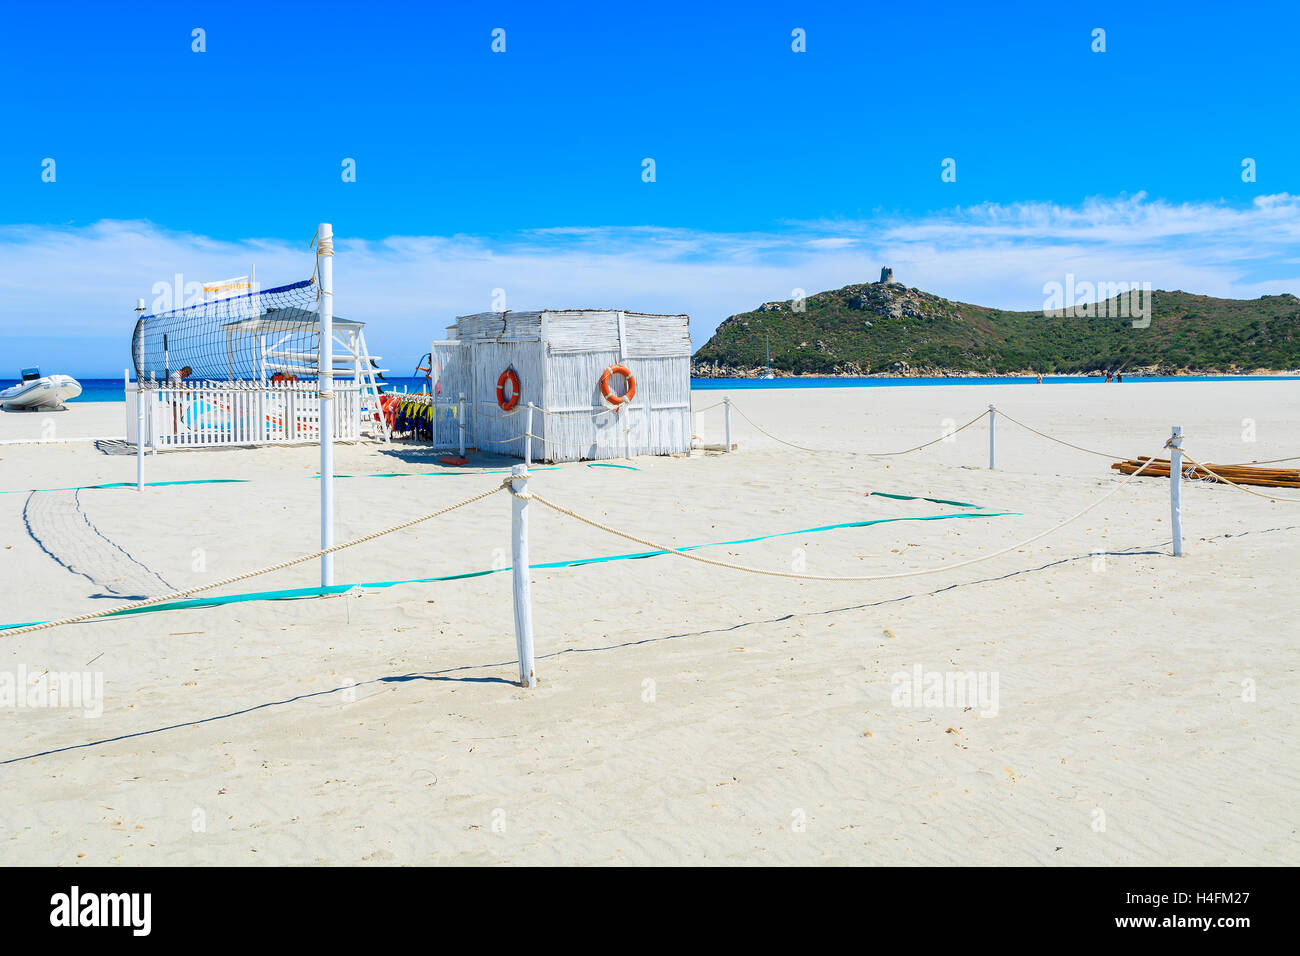 PORTO GIUNCO BEACH, SARDINIA - MAY 27, 2014: volleyball field on Porto Giunco sandy beach, Sardinia island, Italy. Volleyball is a popular sport to play on a beach. Stock Photo